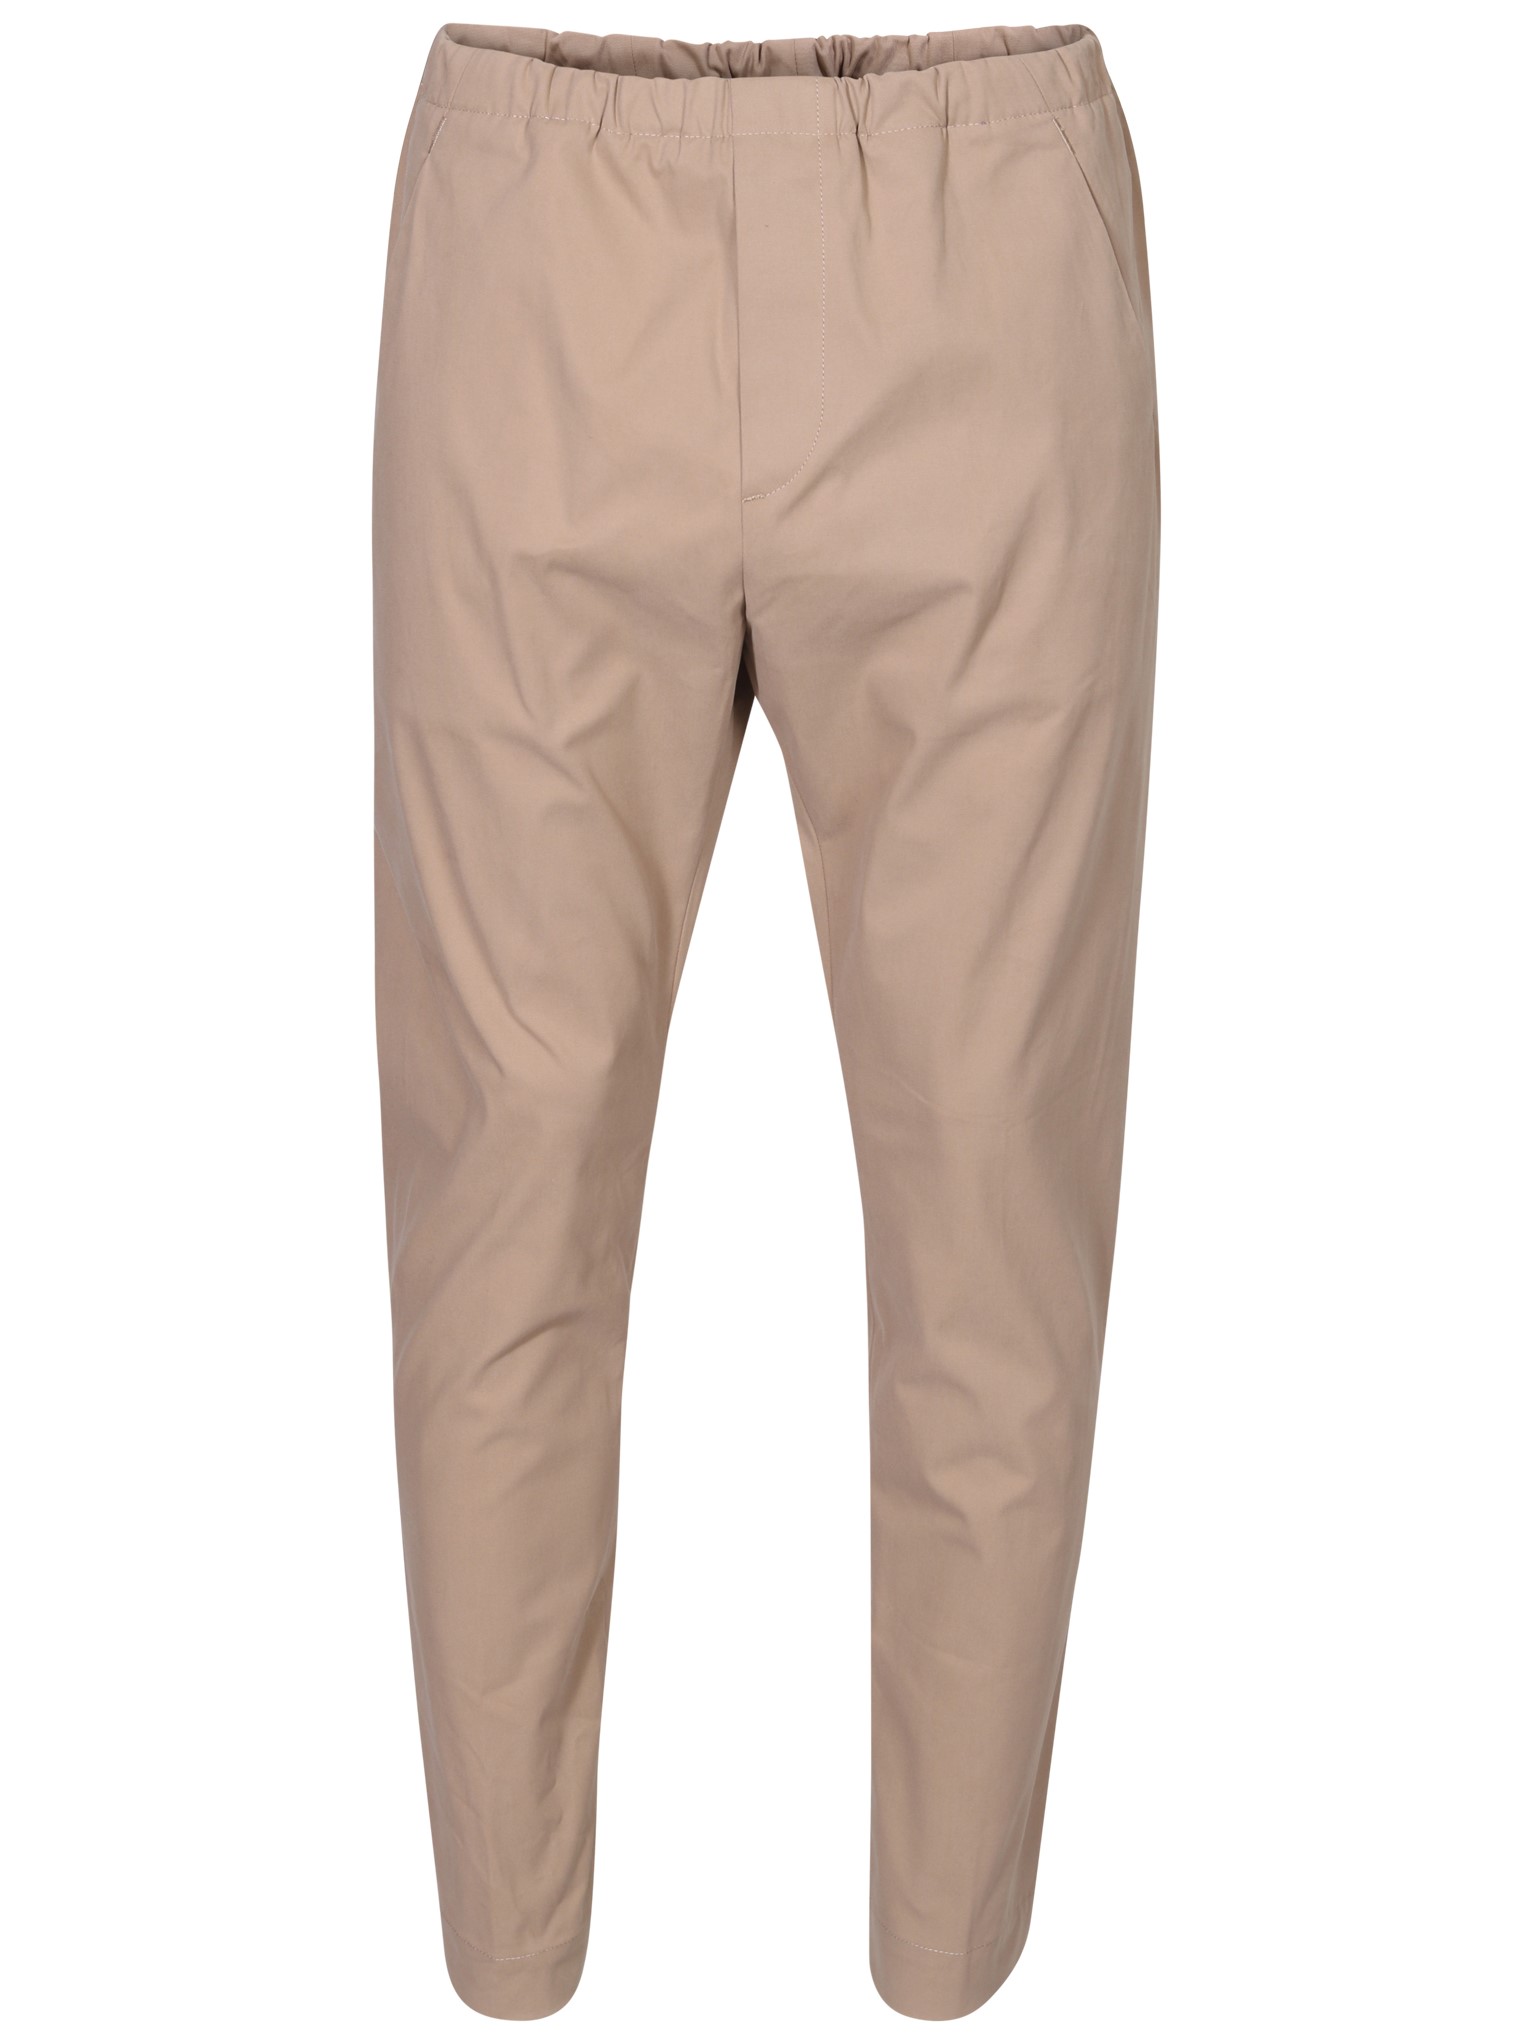 NINE:INTHE:MORNING Mirco Carrot Cotton Stretch Pant in Beige